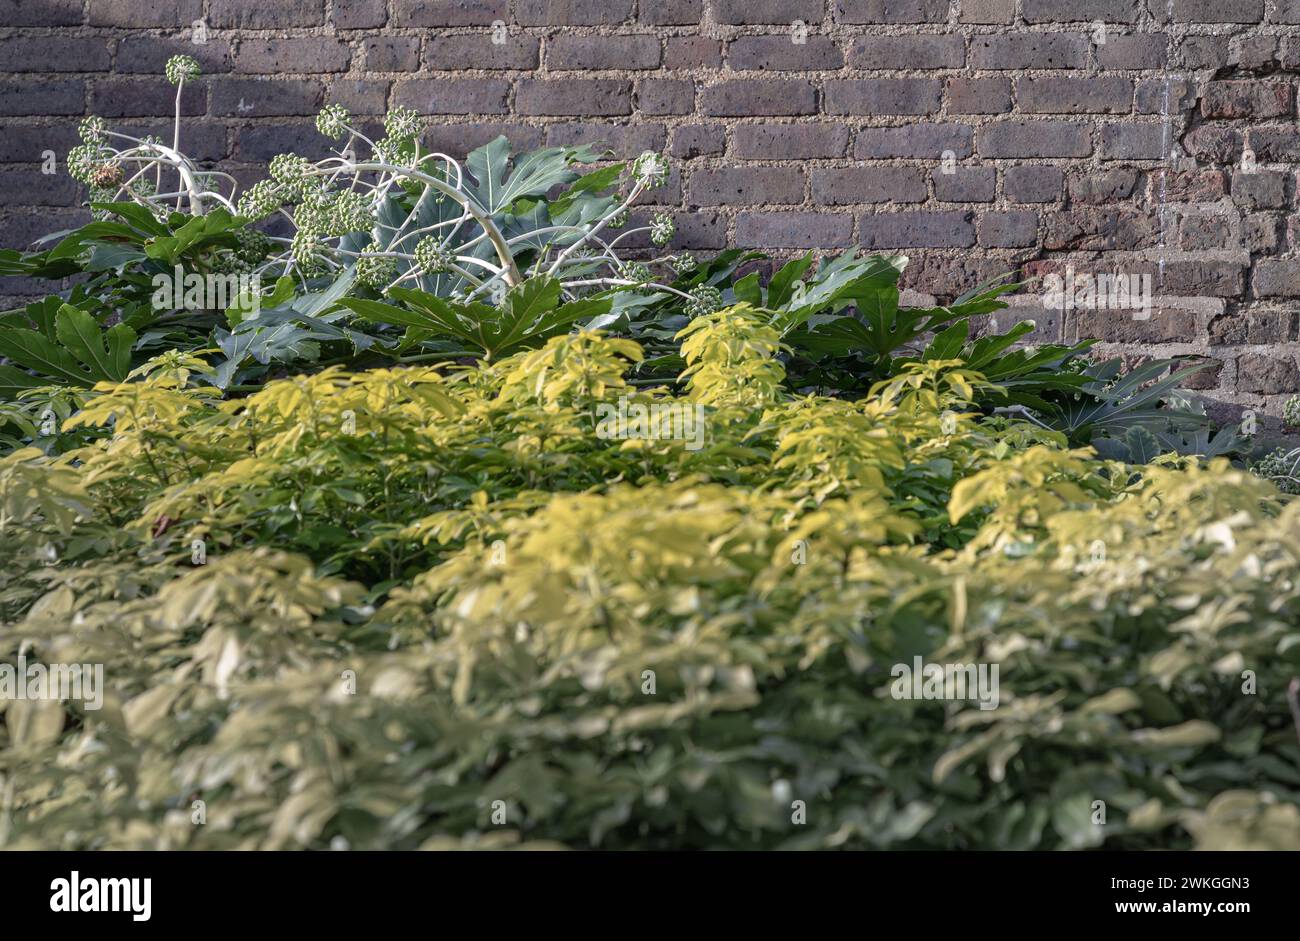 Japanese Aralia (Paper plant) or Fatsia japonica 'Spider's Web' full blossom with Brick wall background. Spherical umbels of tiny white flowers and la Stock Photo